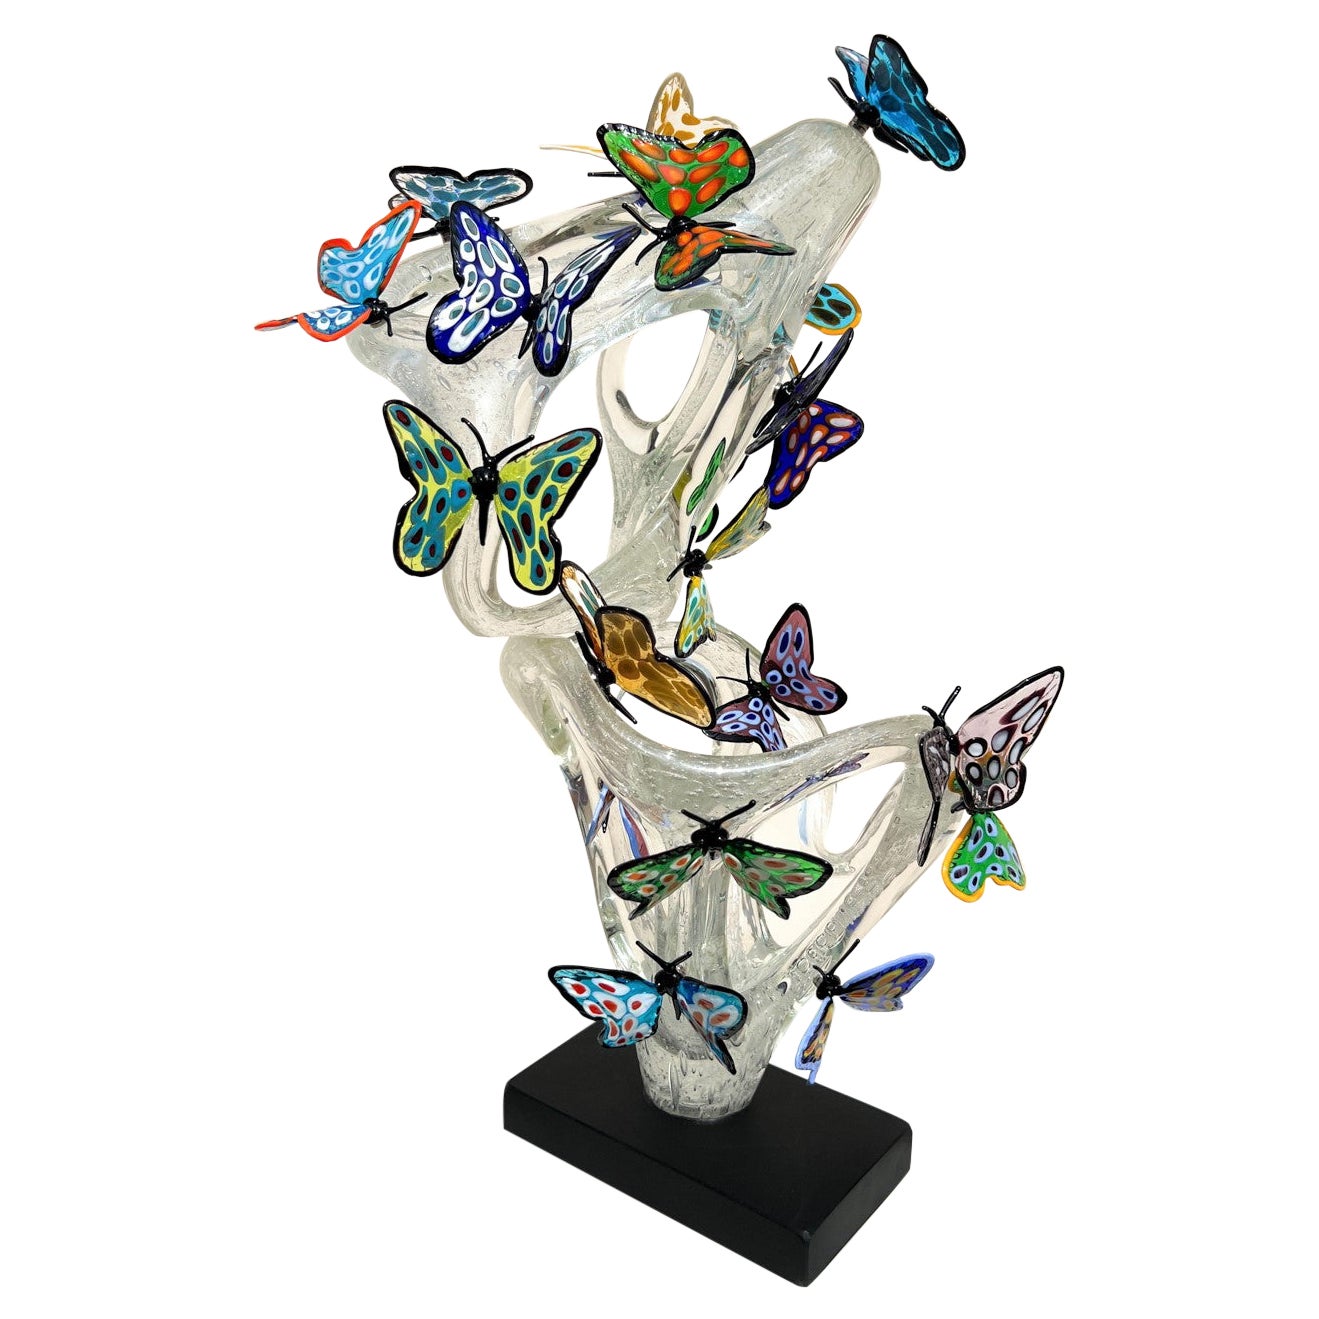 Costantini Modern Crystal Made Murano Glass Infinity Sculpture With Butterflies